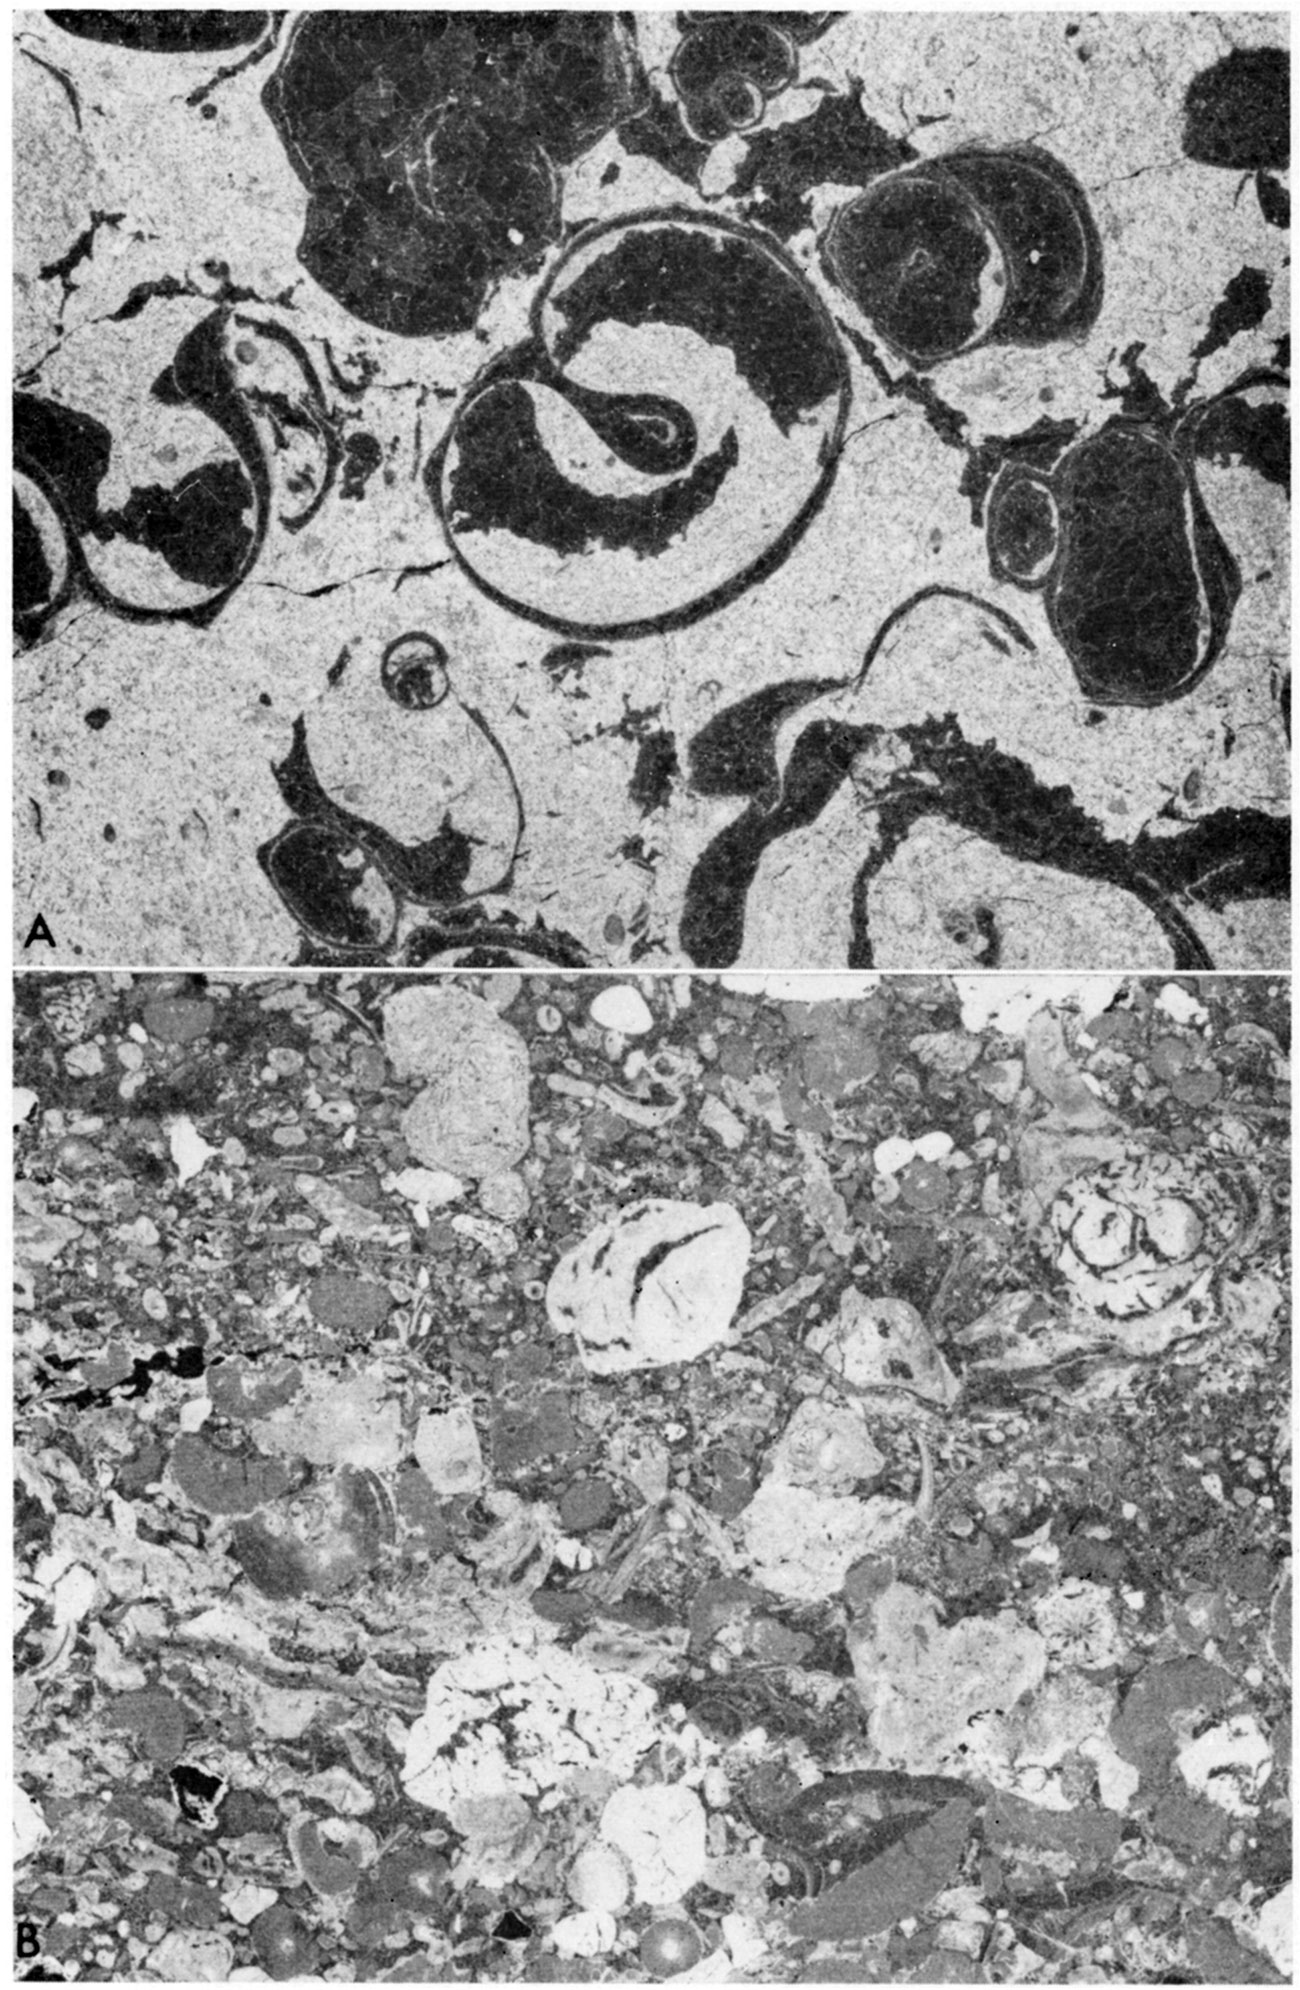 Top: peel-print of upper part of the Winterset Limestone Member of the Dennis Limestone; bottom: peel-print of the Westerville Limestone Member of the Cherryvale Shale.